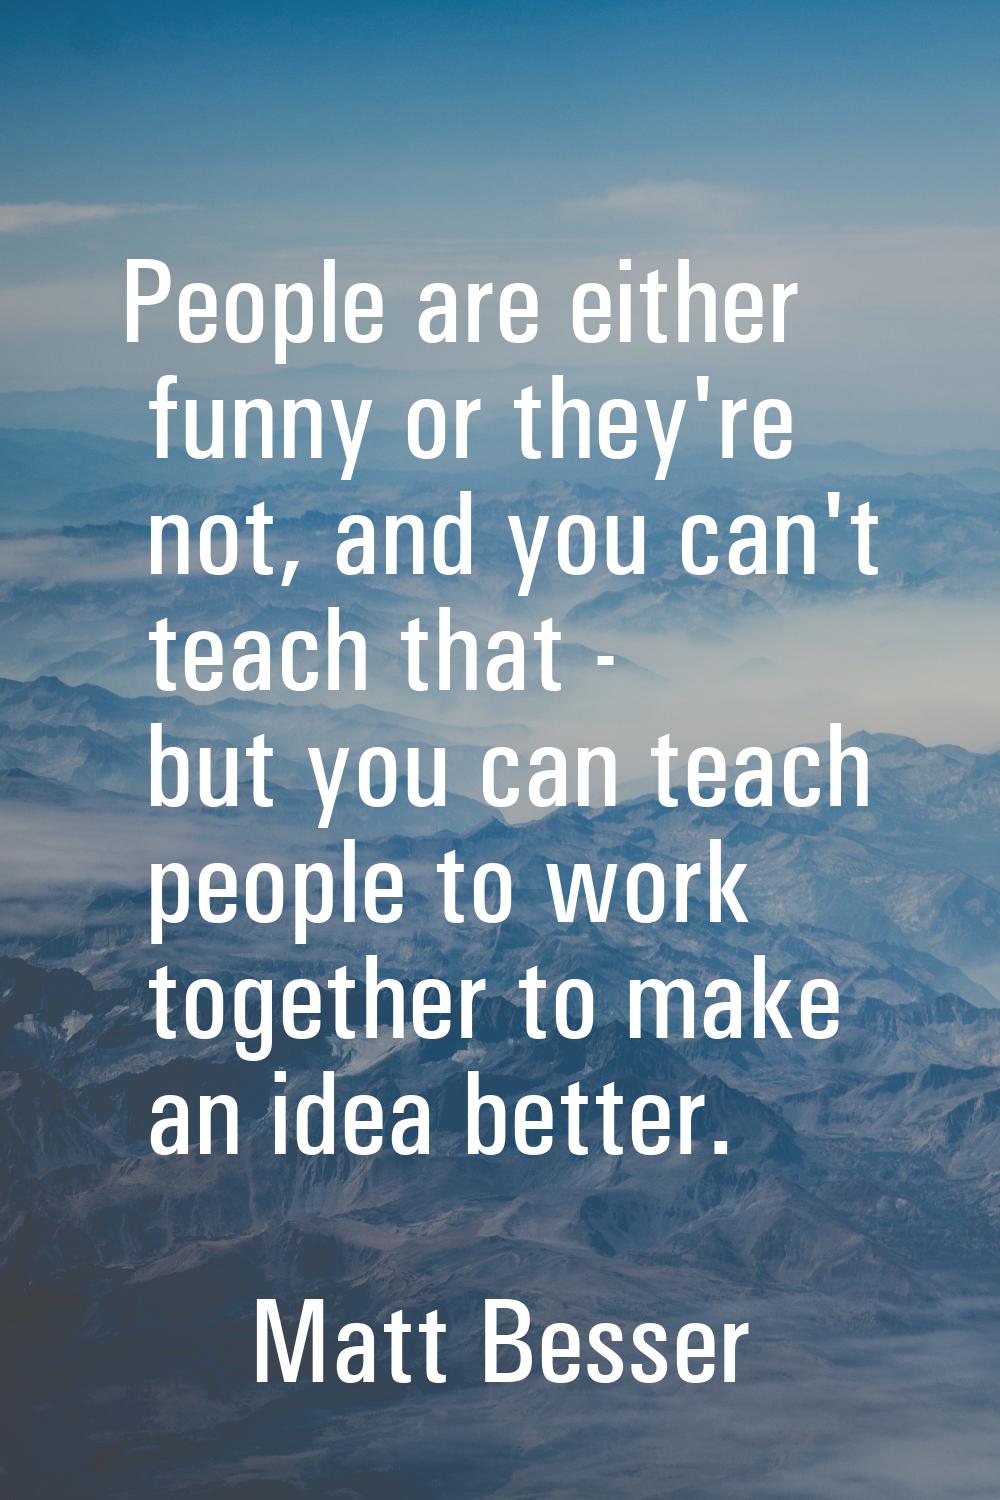 People are either funny or they're not, and you can't teach that - but you can teach people to work